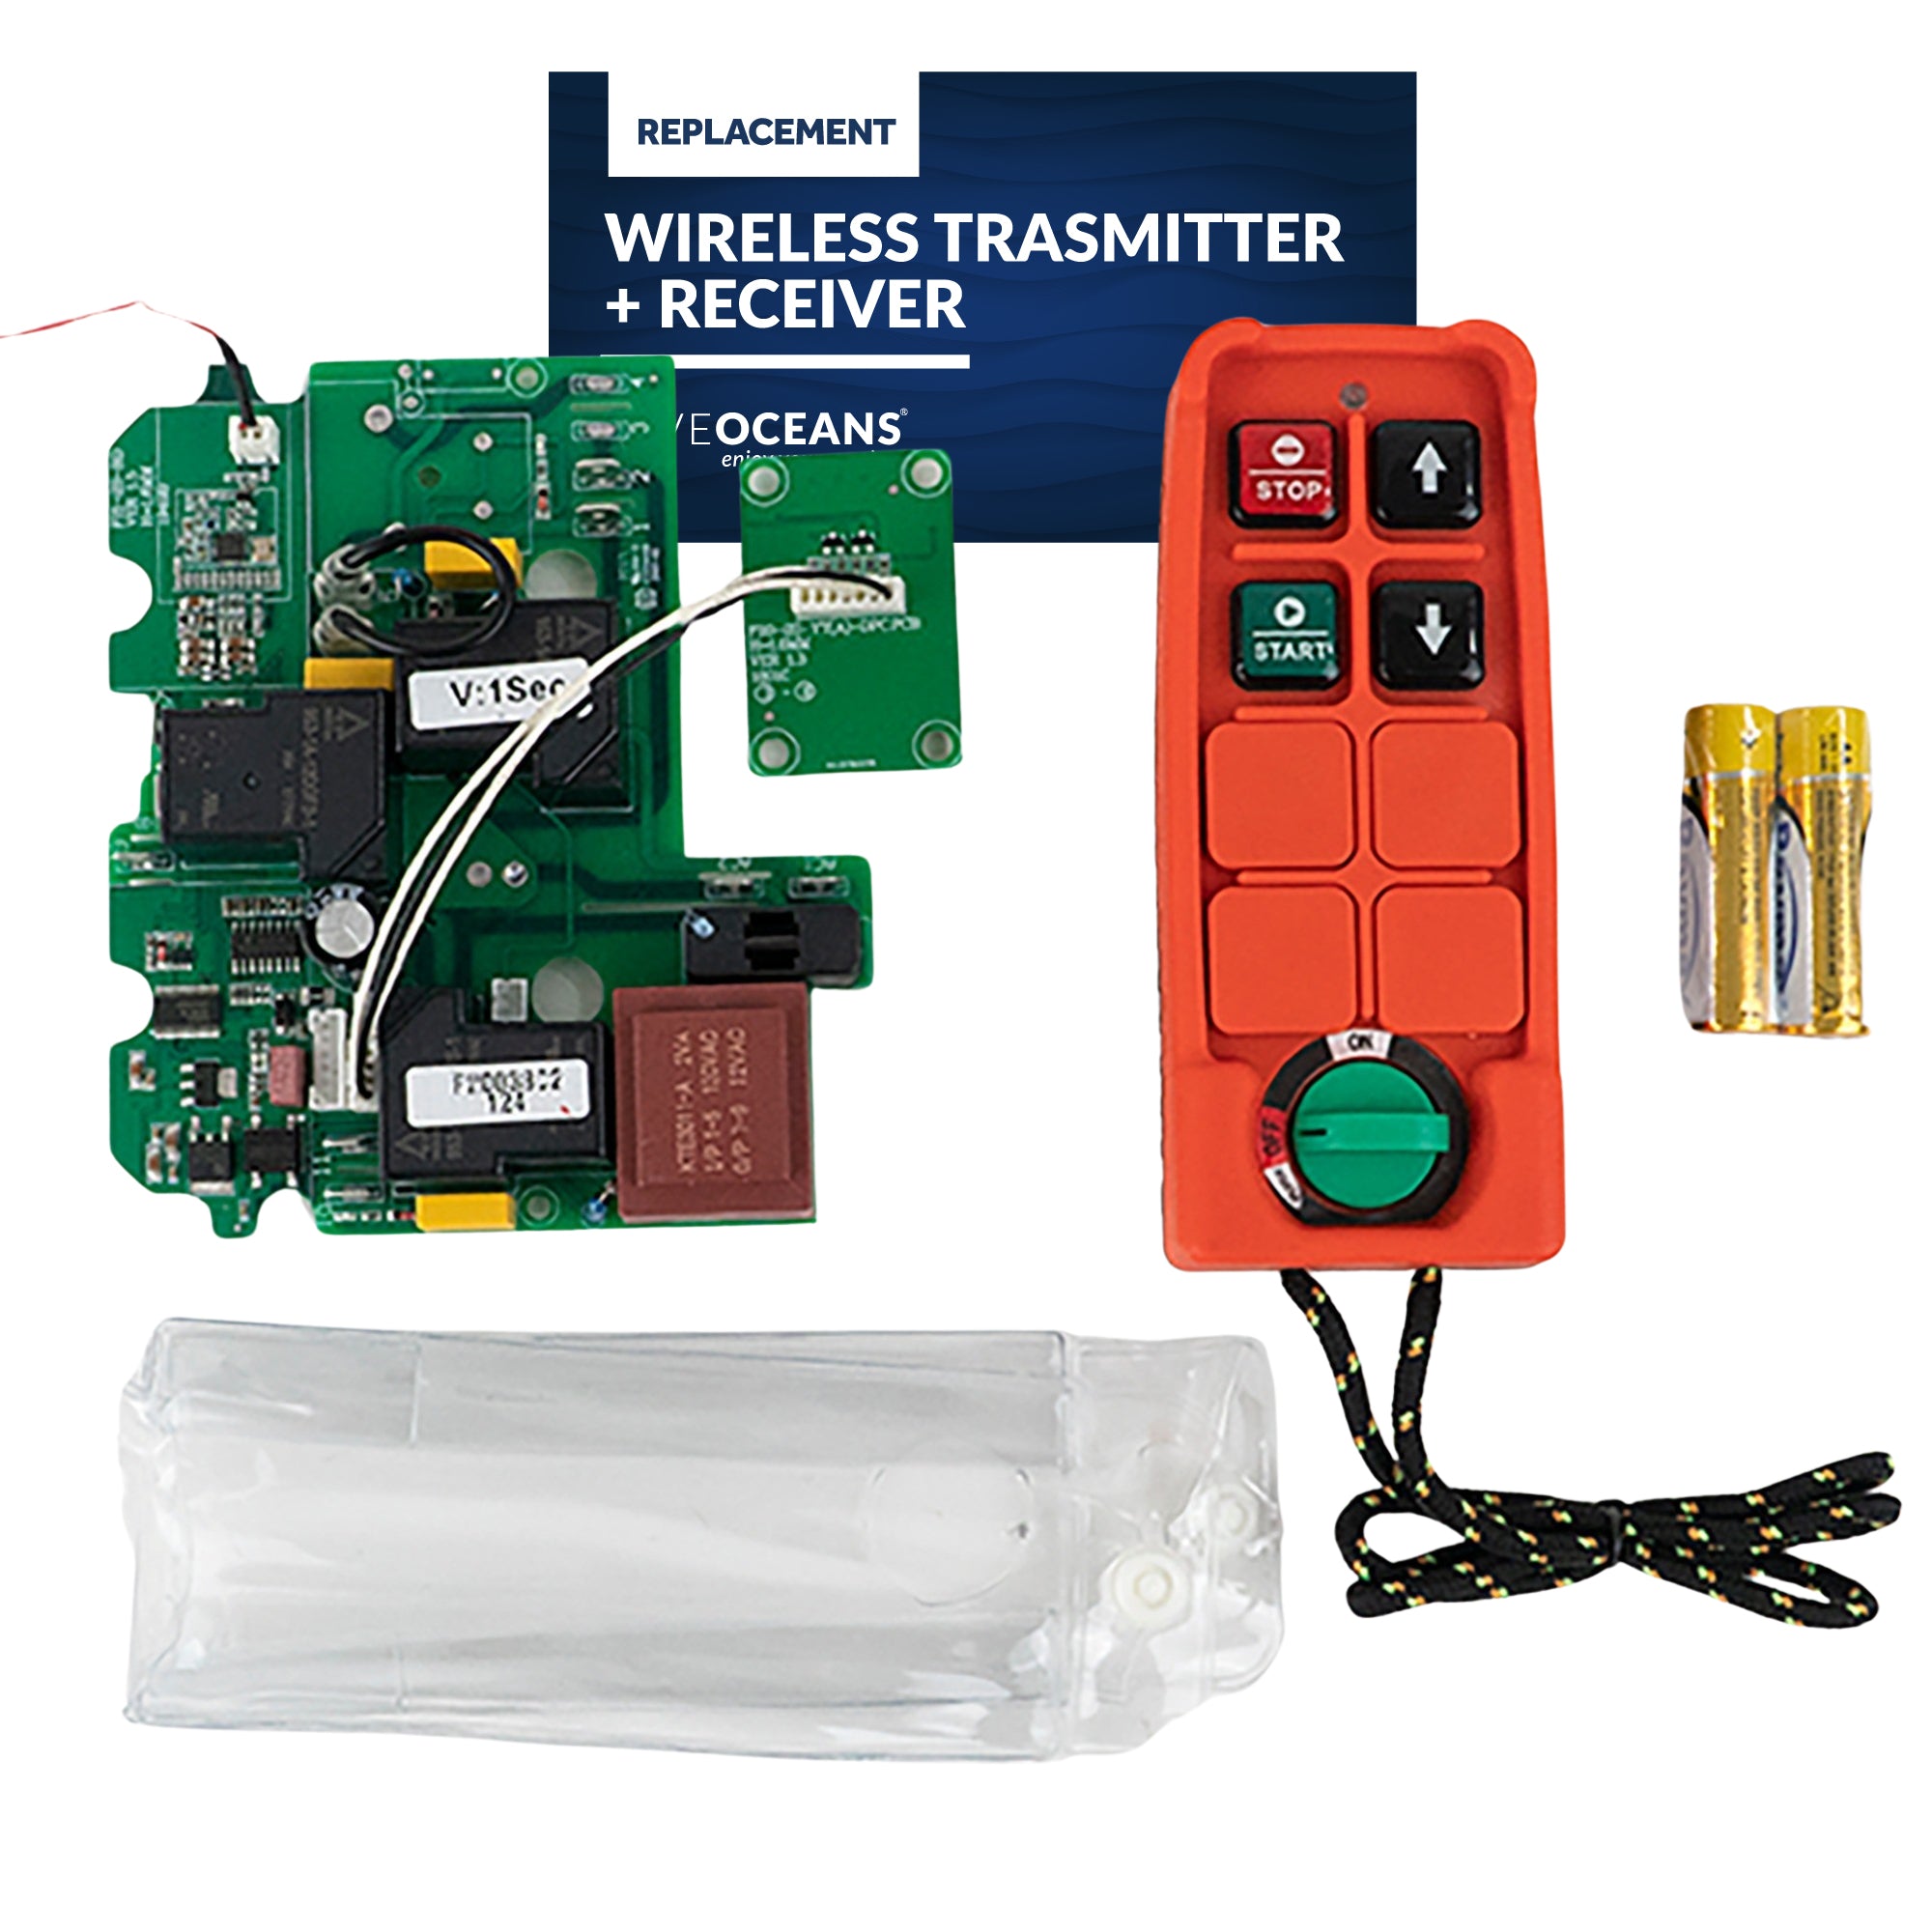 Spare Wireless Trasmitter + Receiver for Remote Control - FO4413